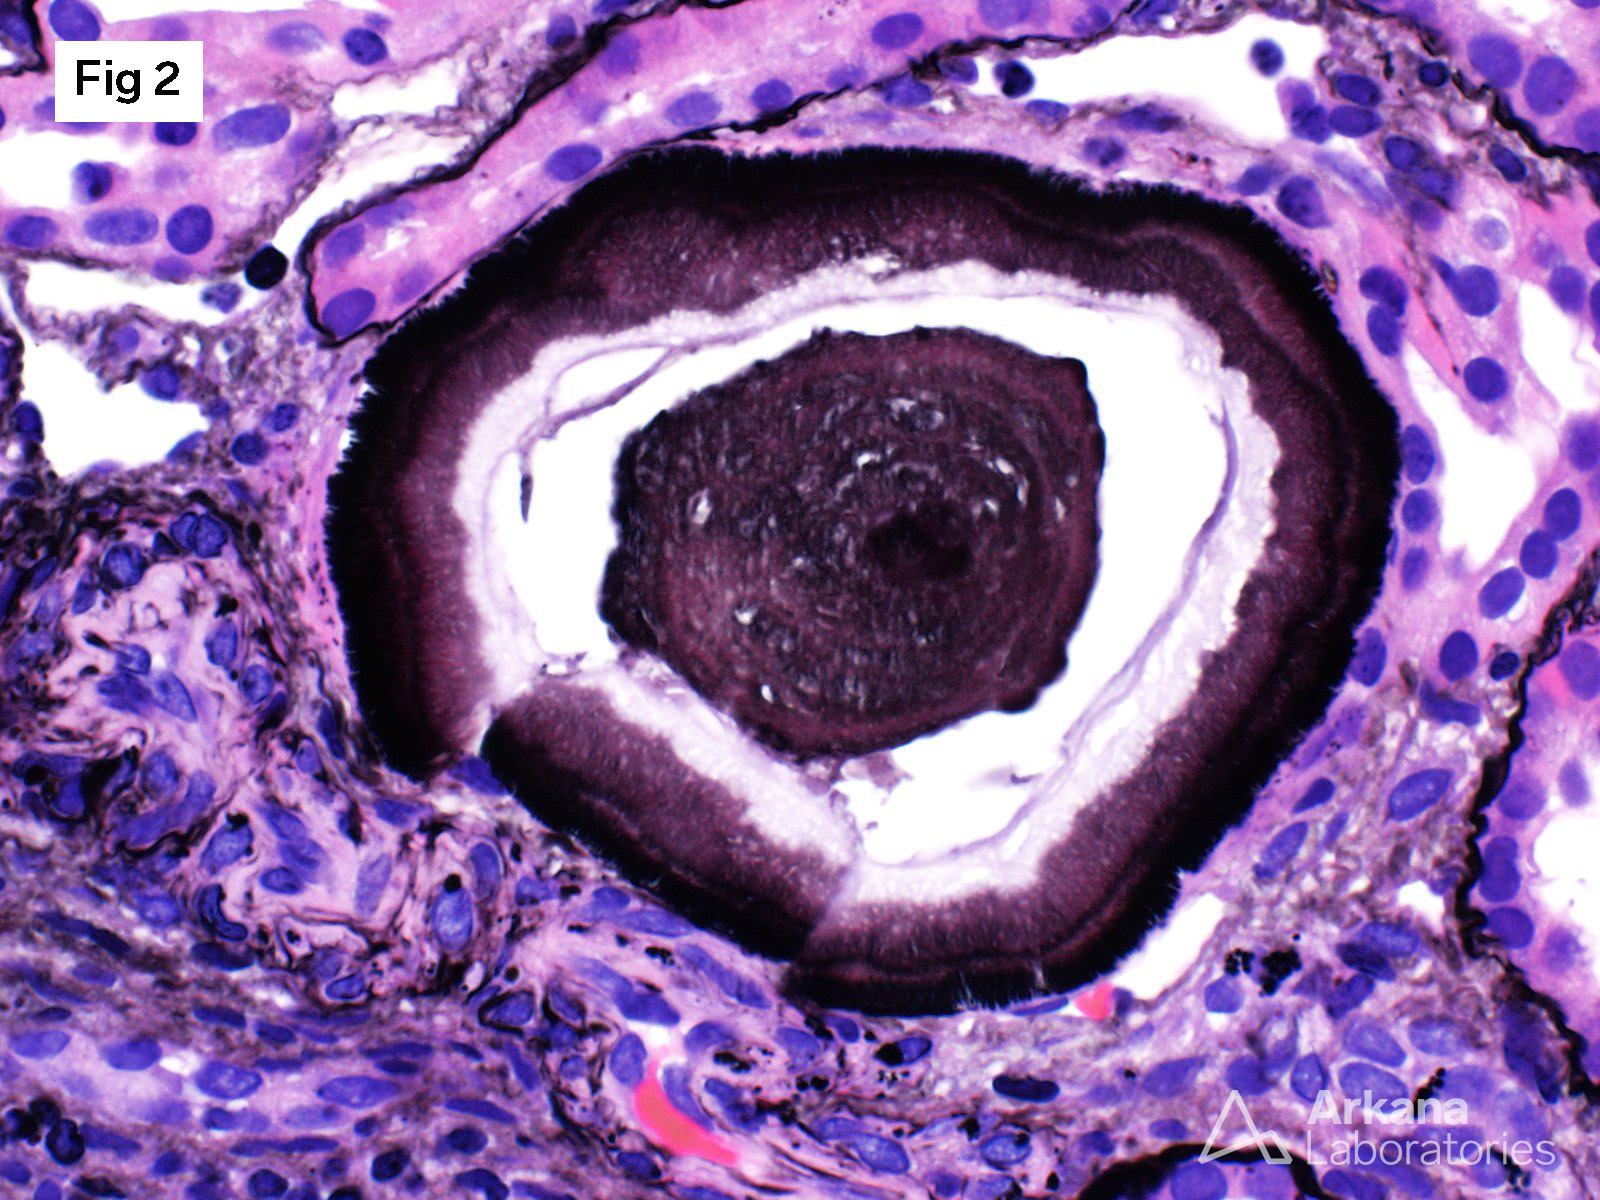 large lamellated silver-positive casts with prominent peripheral spicules